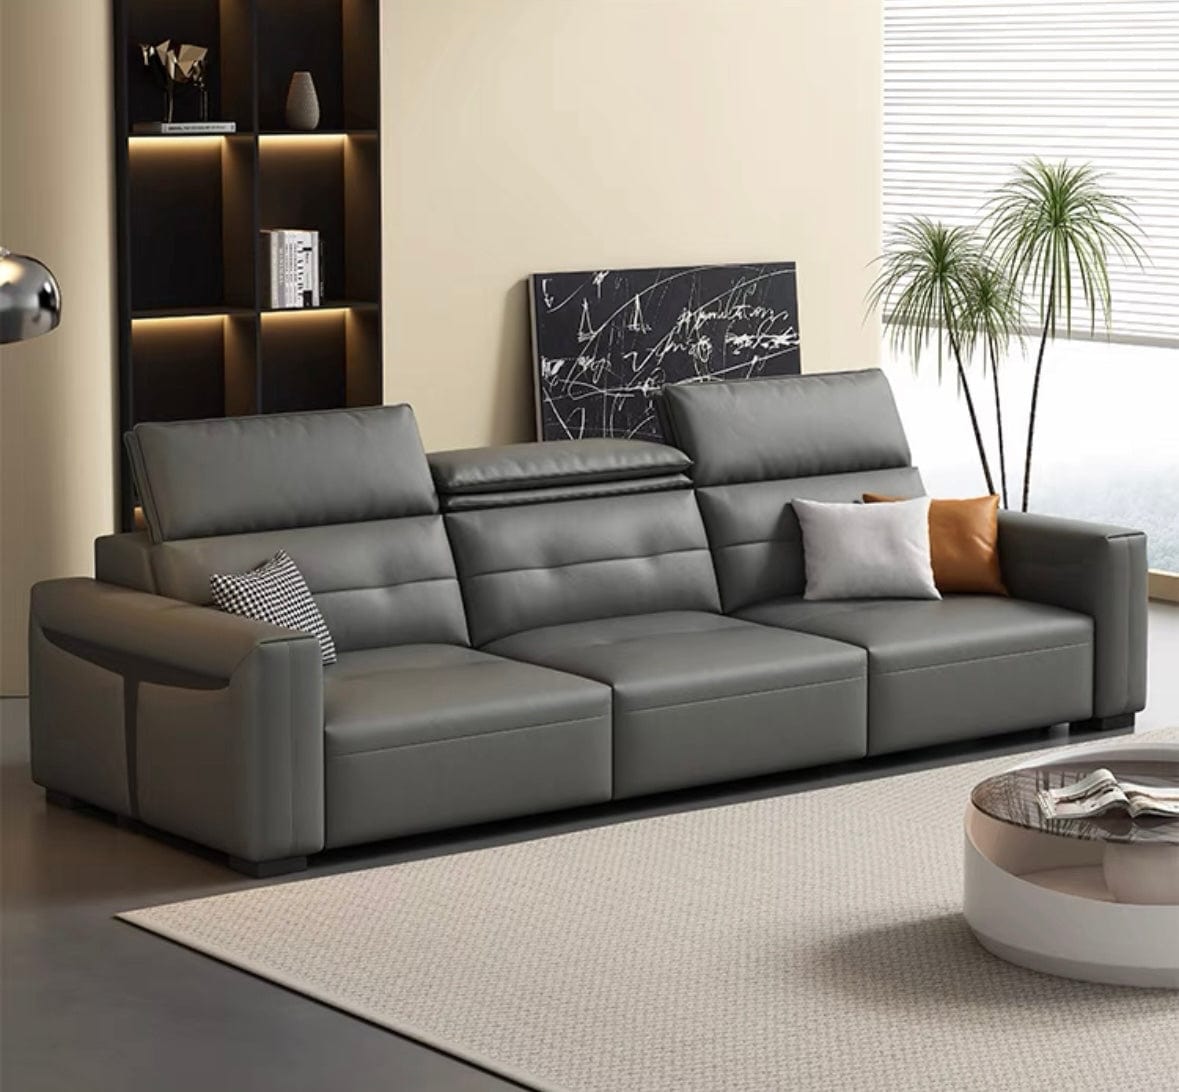 Home Atelier Roch Electric Motorized Leather Sofa Bed